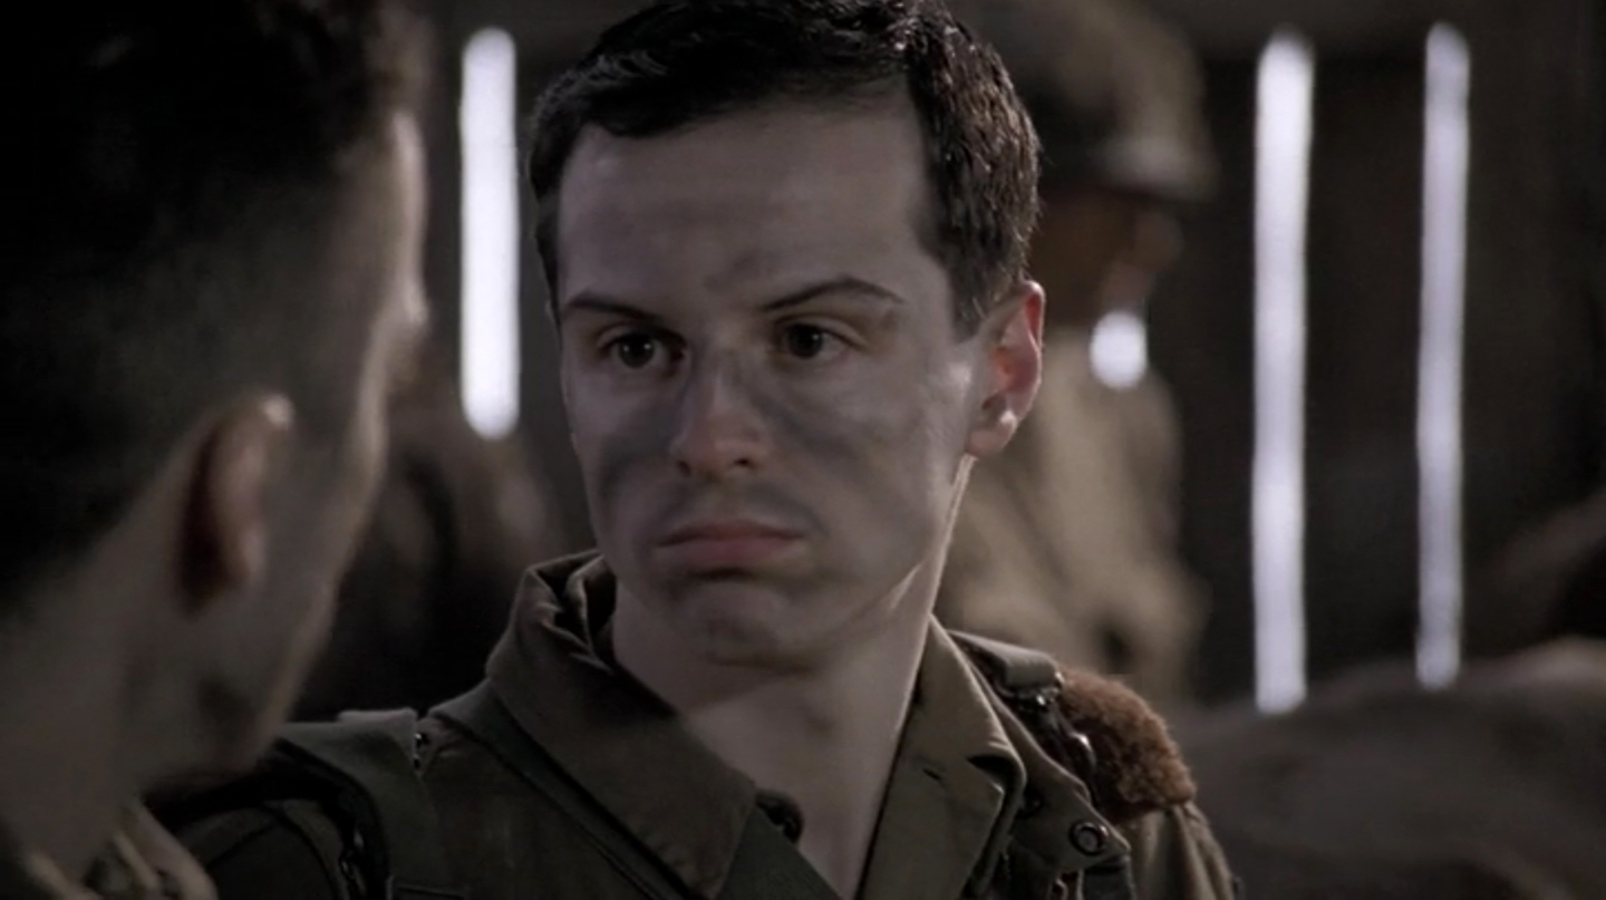  Andrew Scott, in the Band of Brothers cast is covered in war paint during a scene in the show